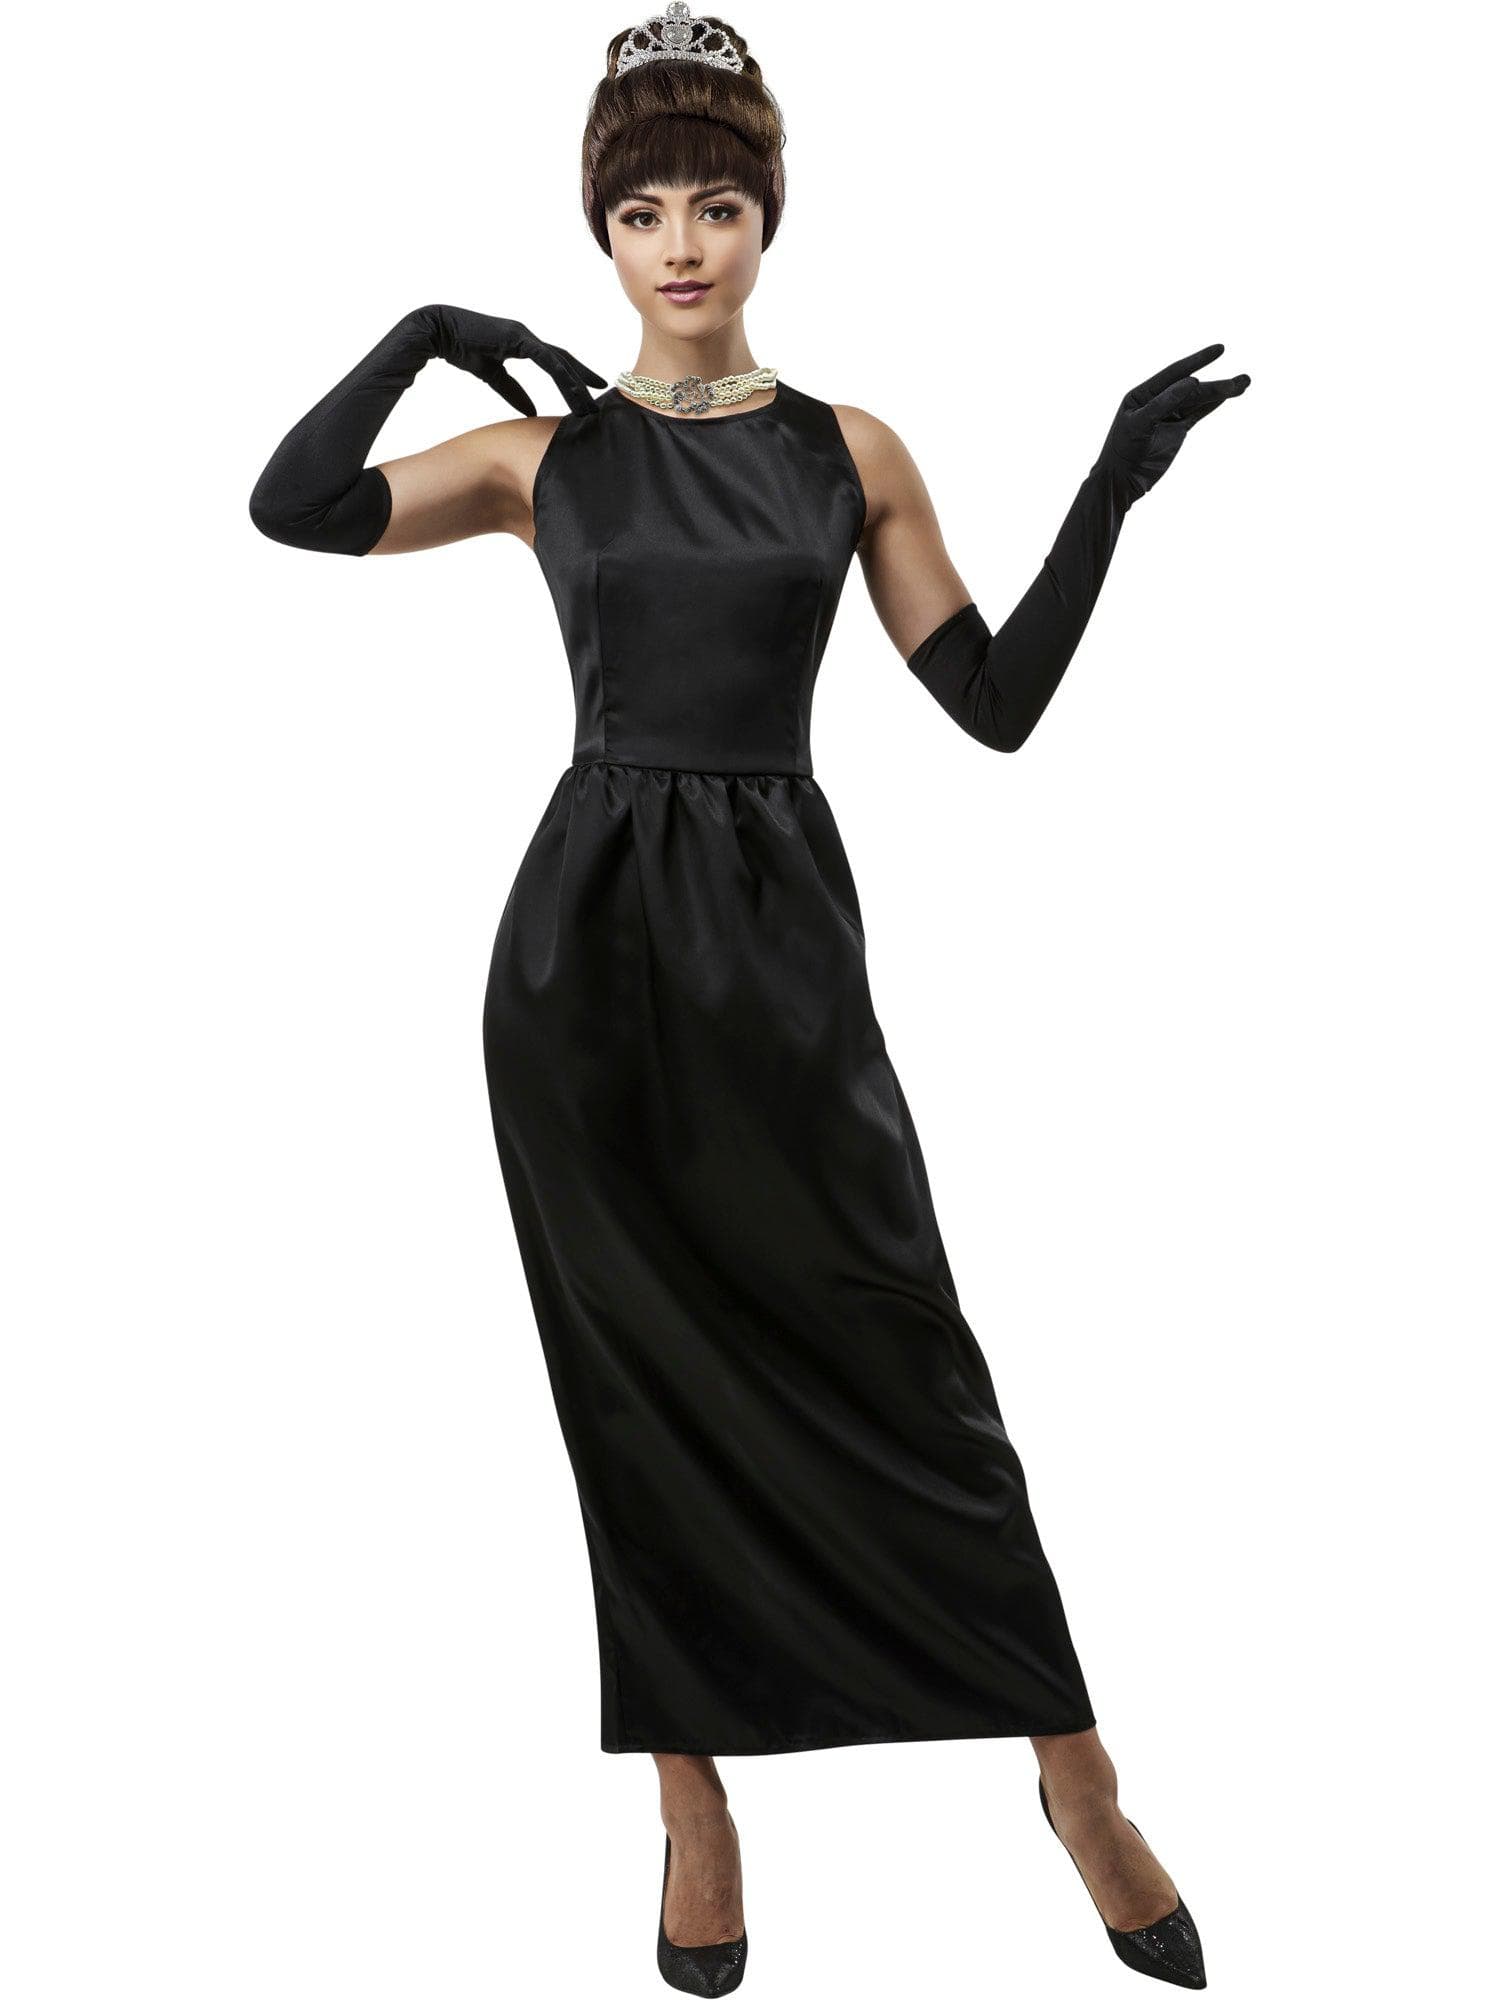 Women's Breakfast at Tiffany's Holly Golightly Costume - costumes.com